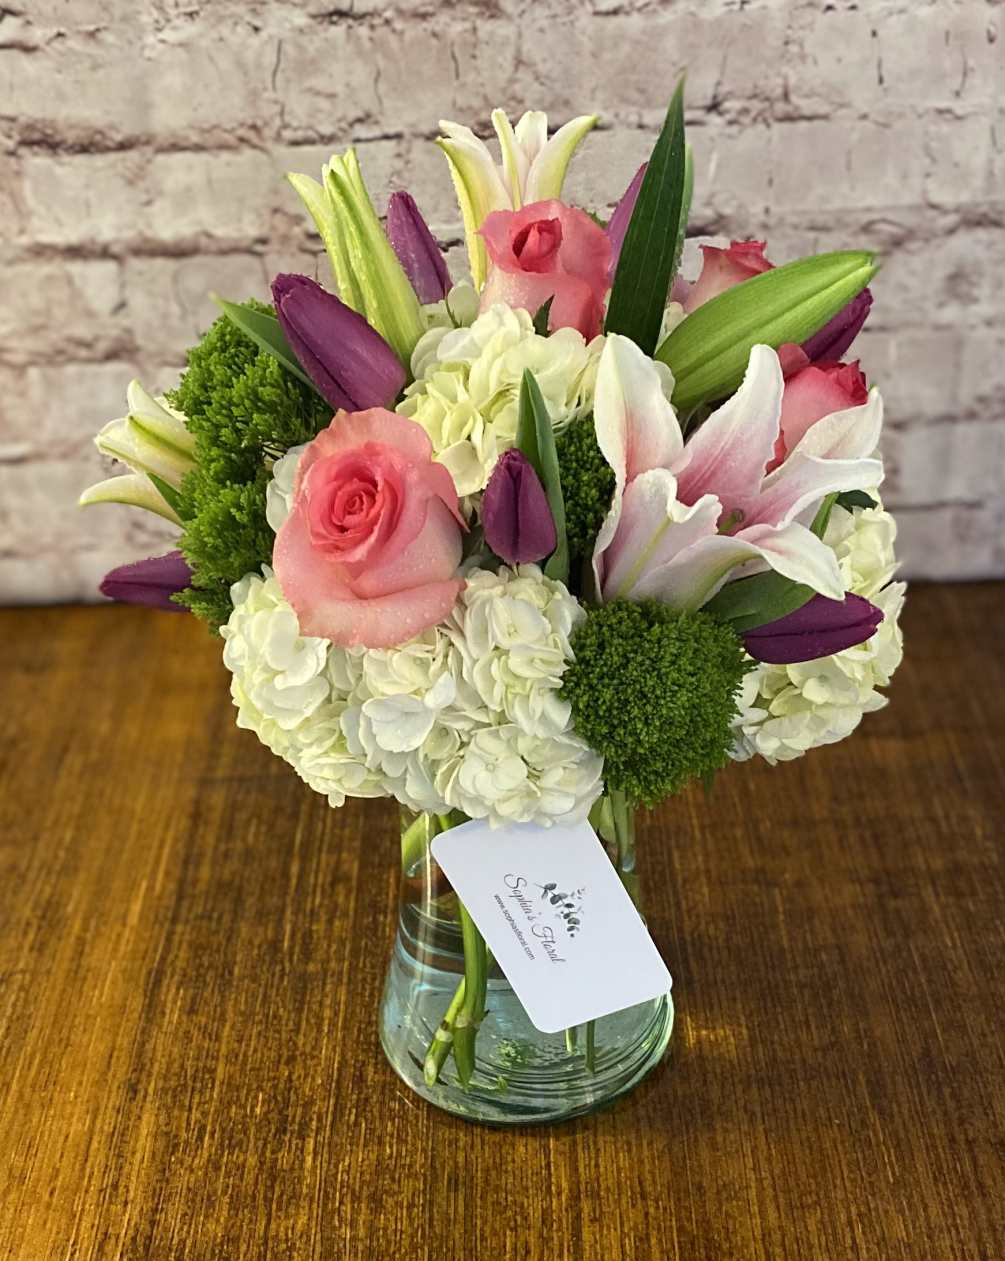 A beautiful assortment of stargazer lilies, hydrangeas, tulips, and roses.